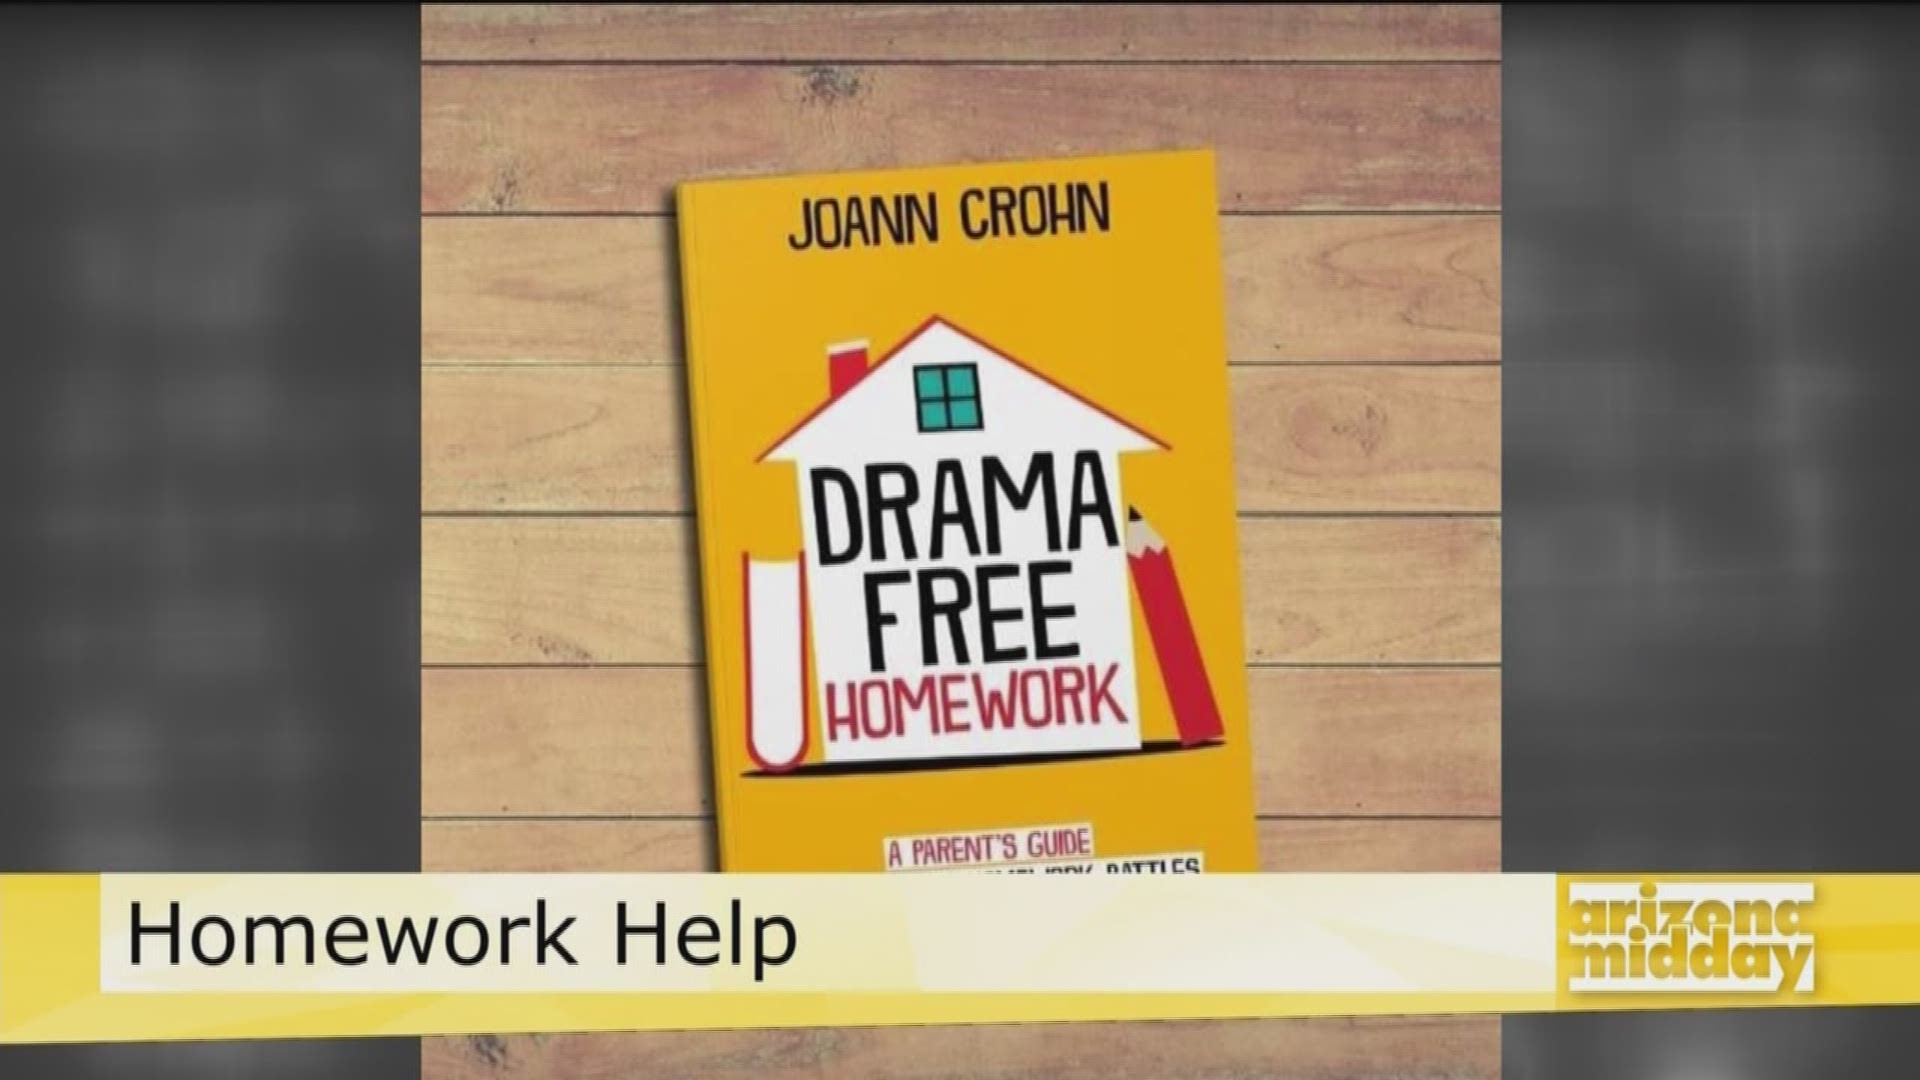 Blogger JoAnn Crohn of No Guilt Mom tells us about her new book and how you can help your child make homework drama-free.